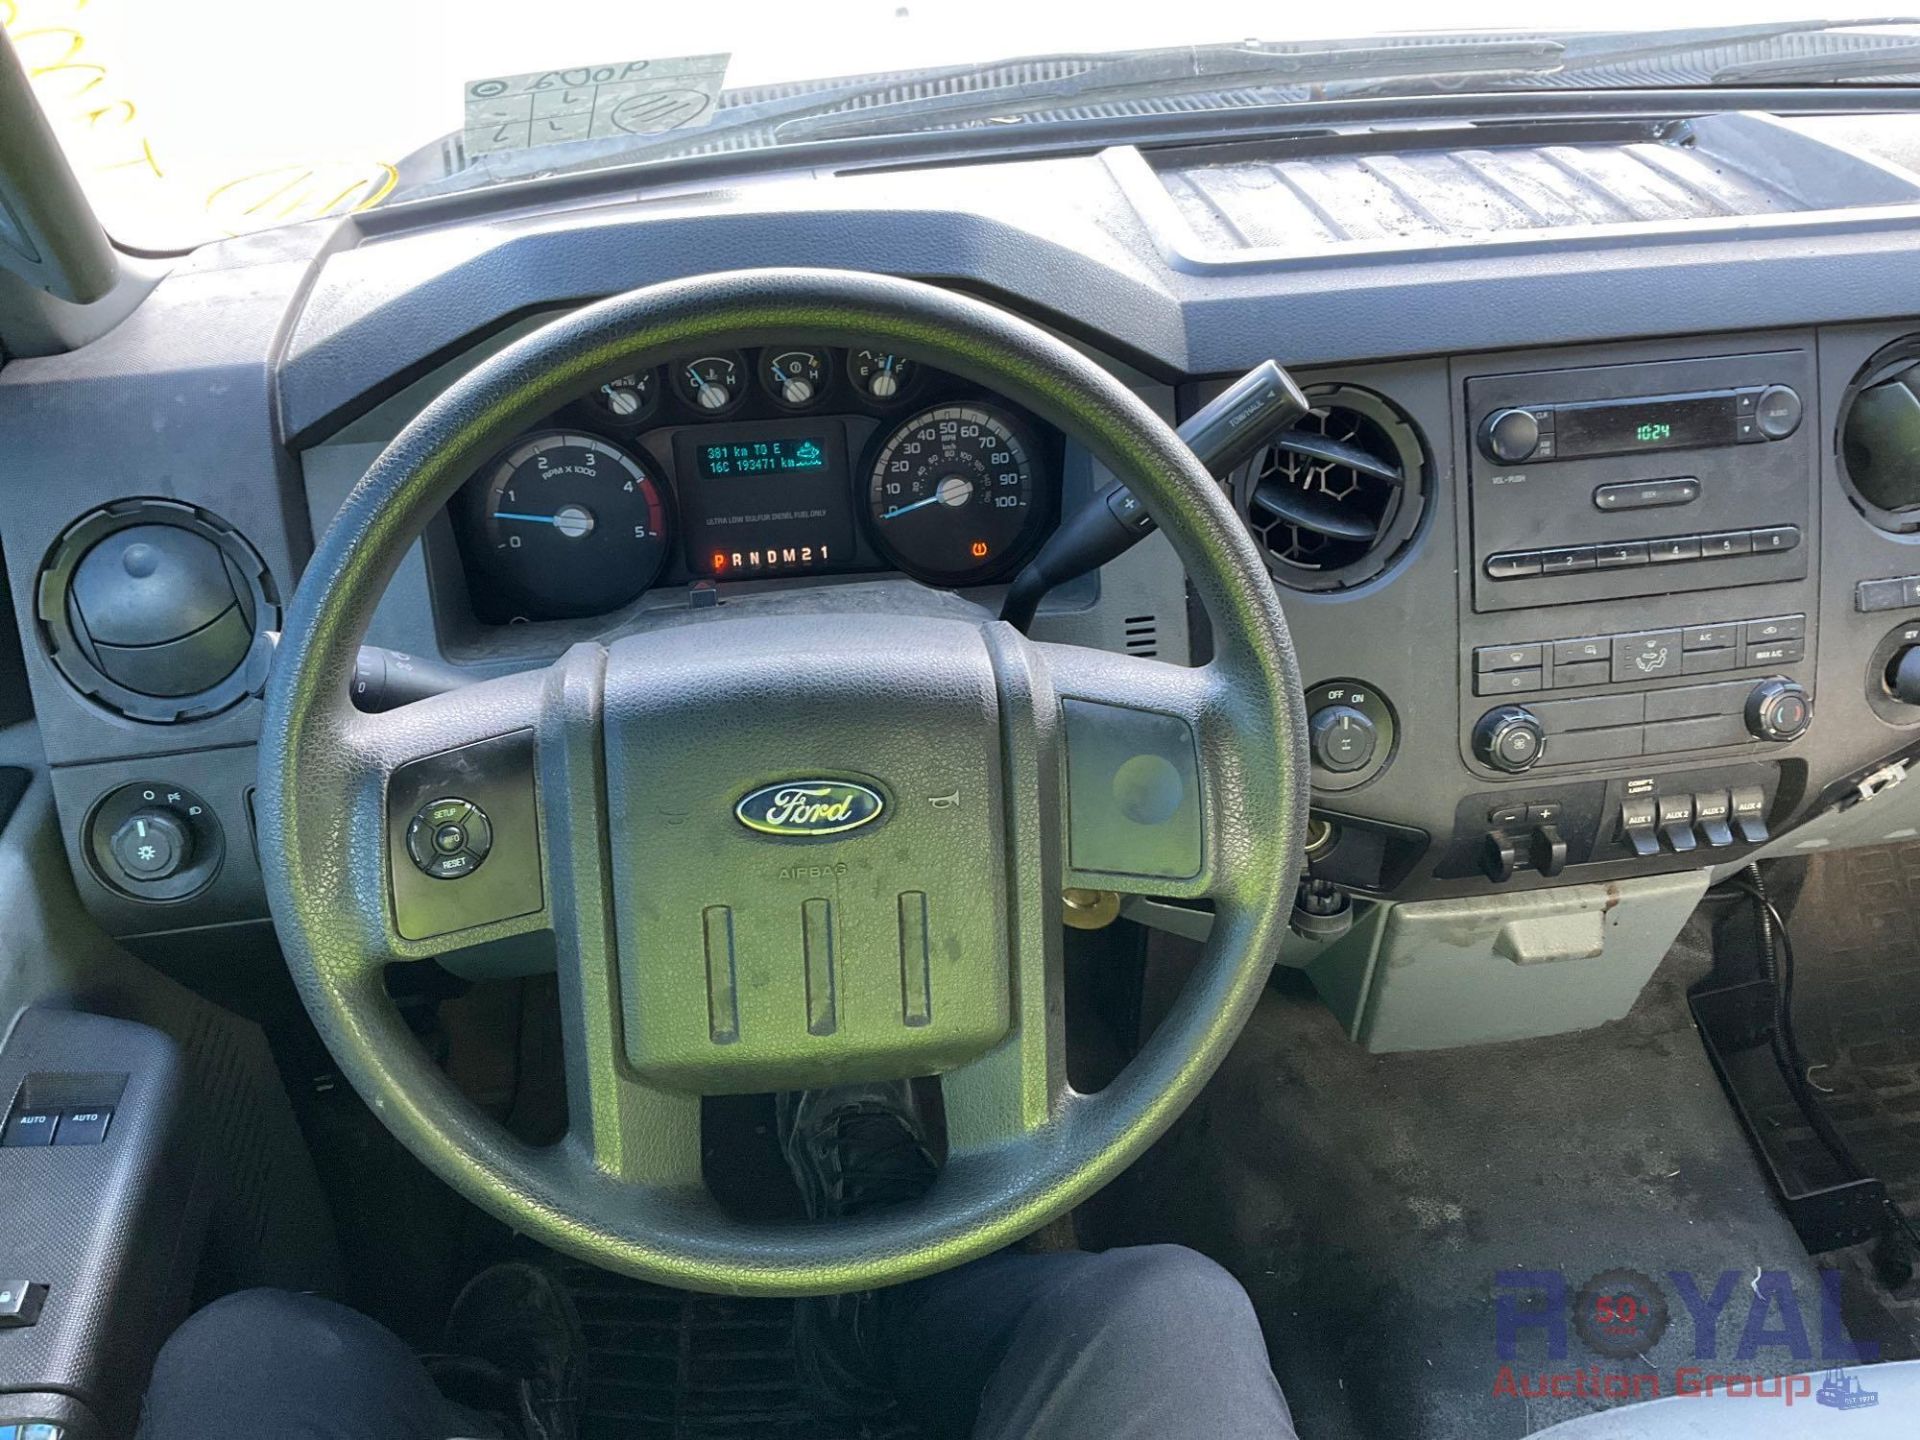 2015 Ford F350 Service Truck - Image 16 of 25